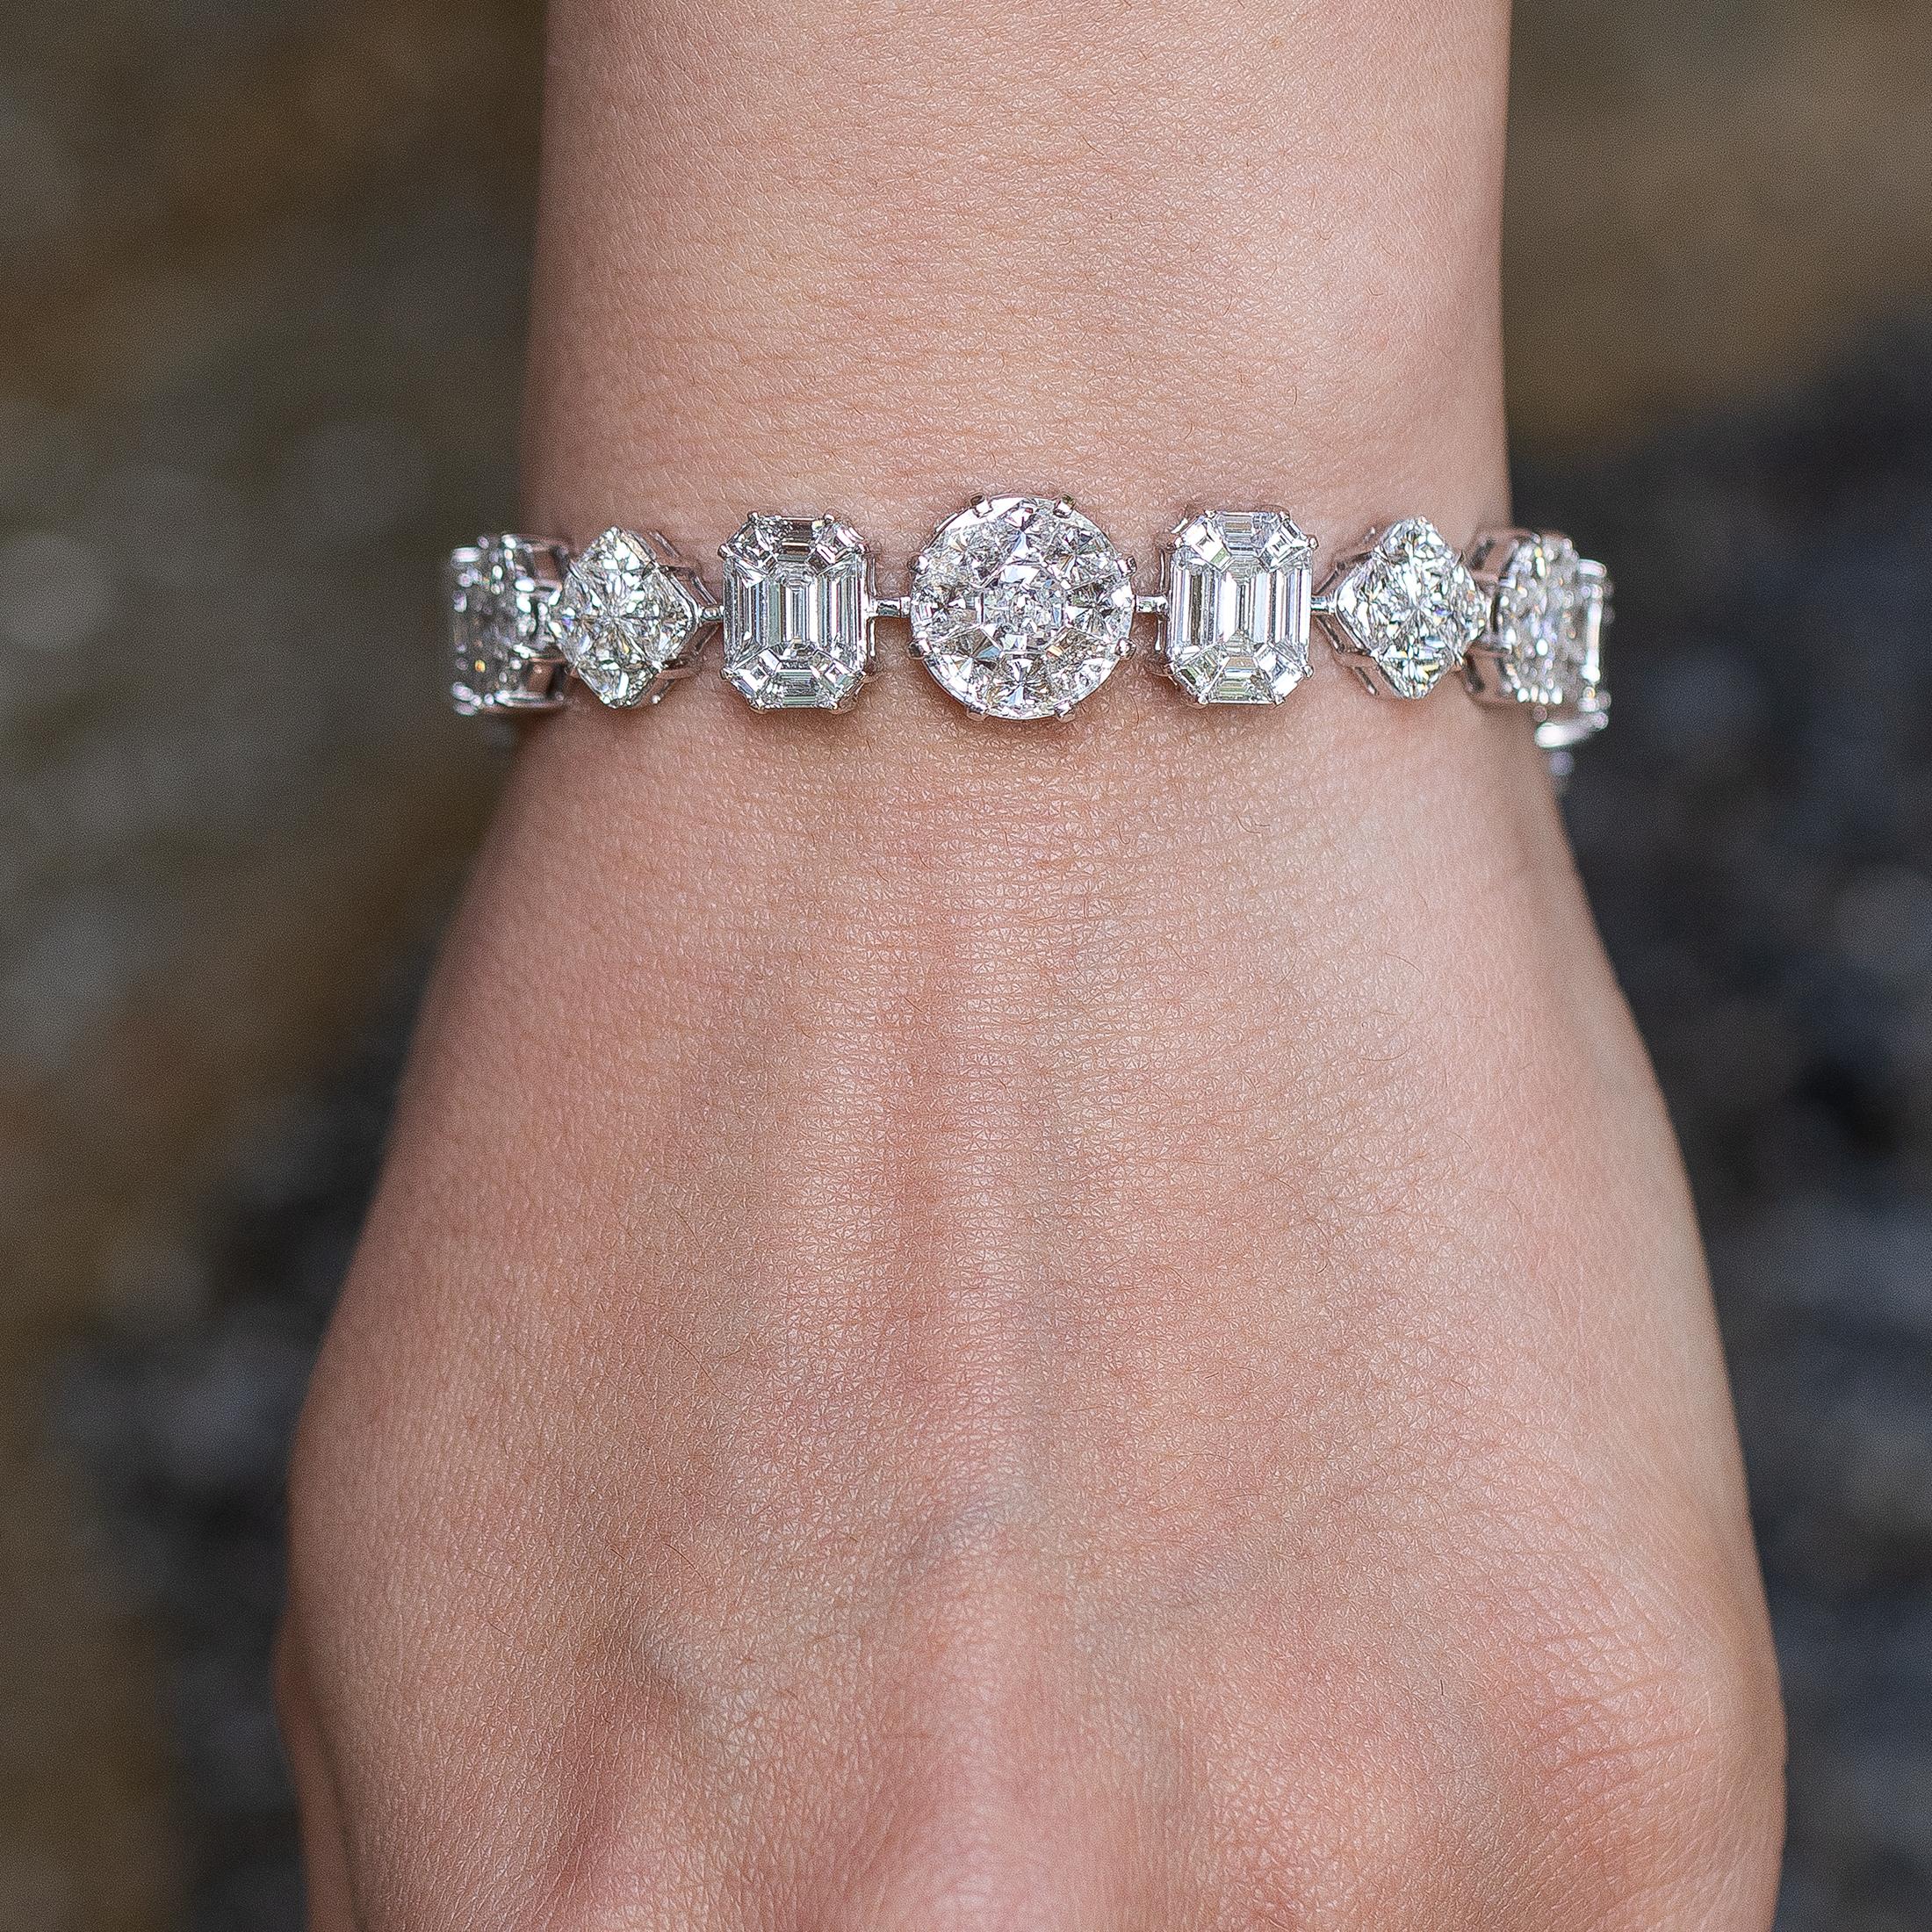 Beautiful diamond bracelet, featuring various shapes and sizes of F color diamonds. 
Diamonds = 33.75 carats
( Color: F, Clarity: VS )
18K White Gold
Length = 7 inches
Jewelry Gift Box Included